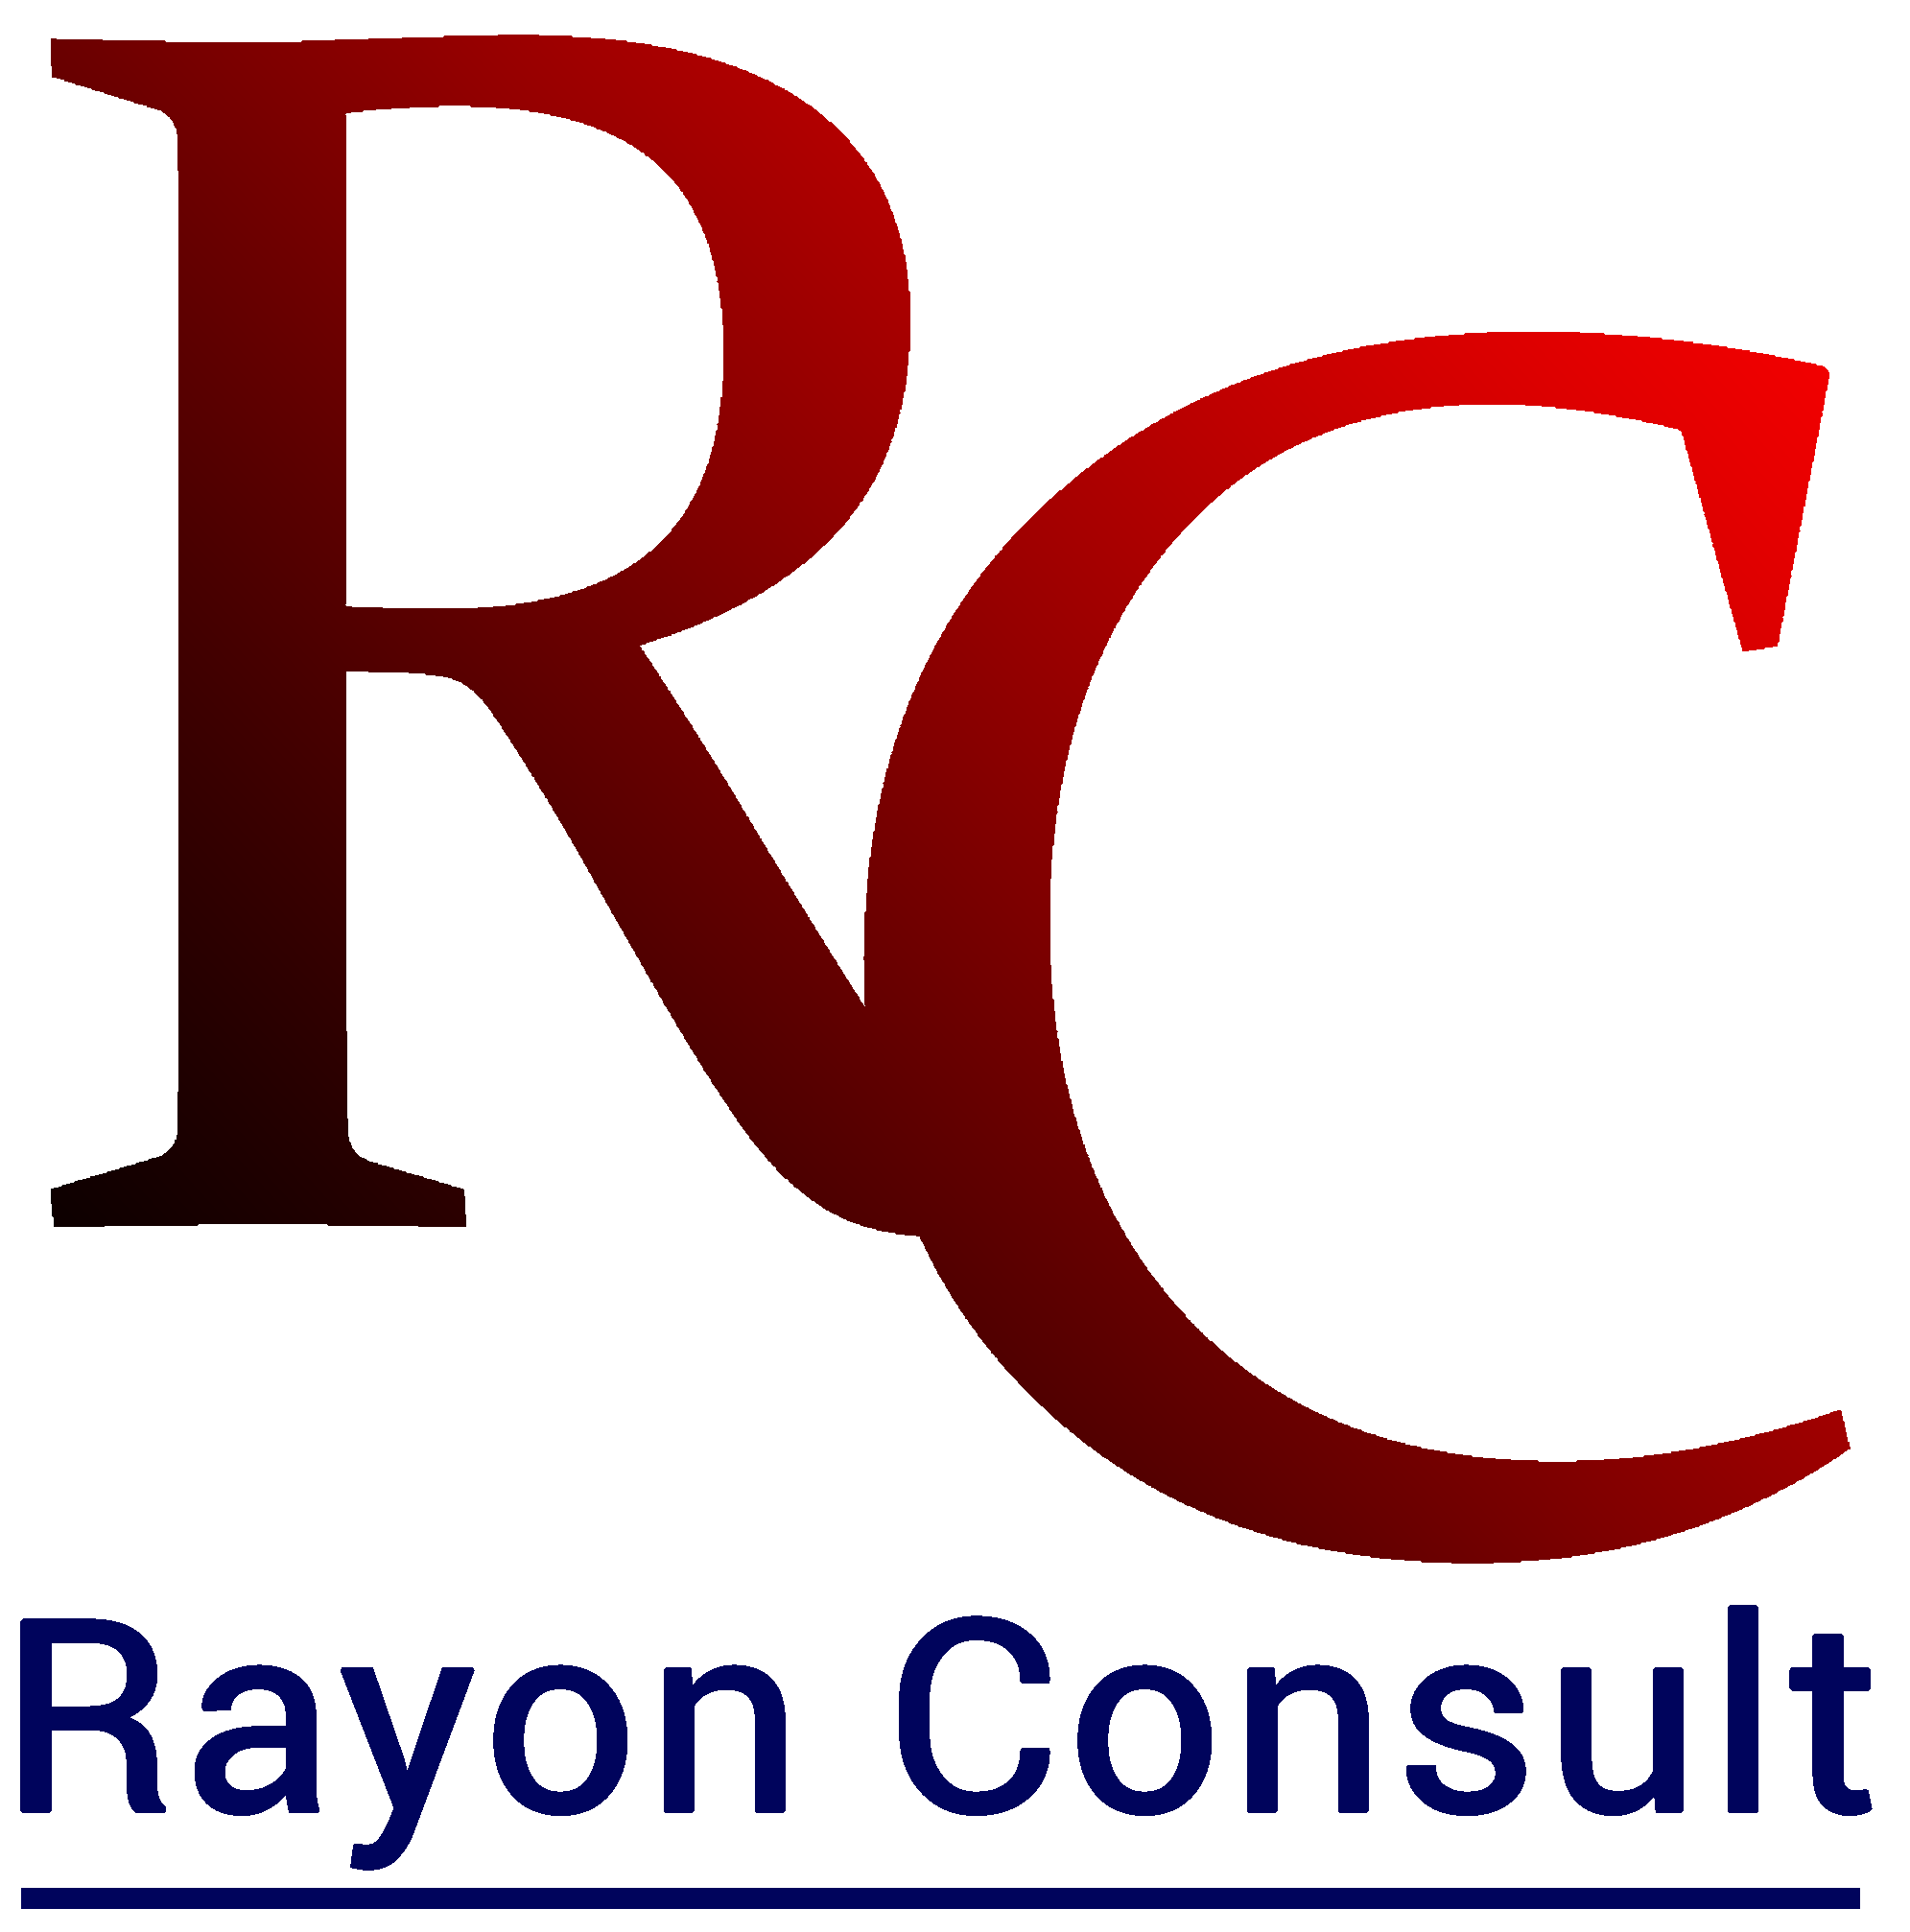 RAYON CONSULT